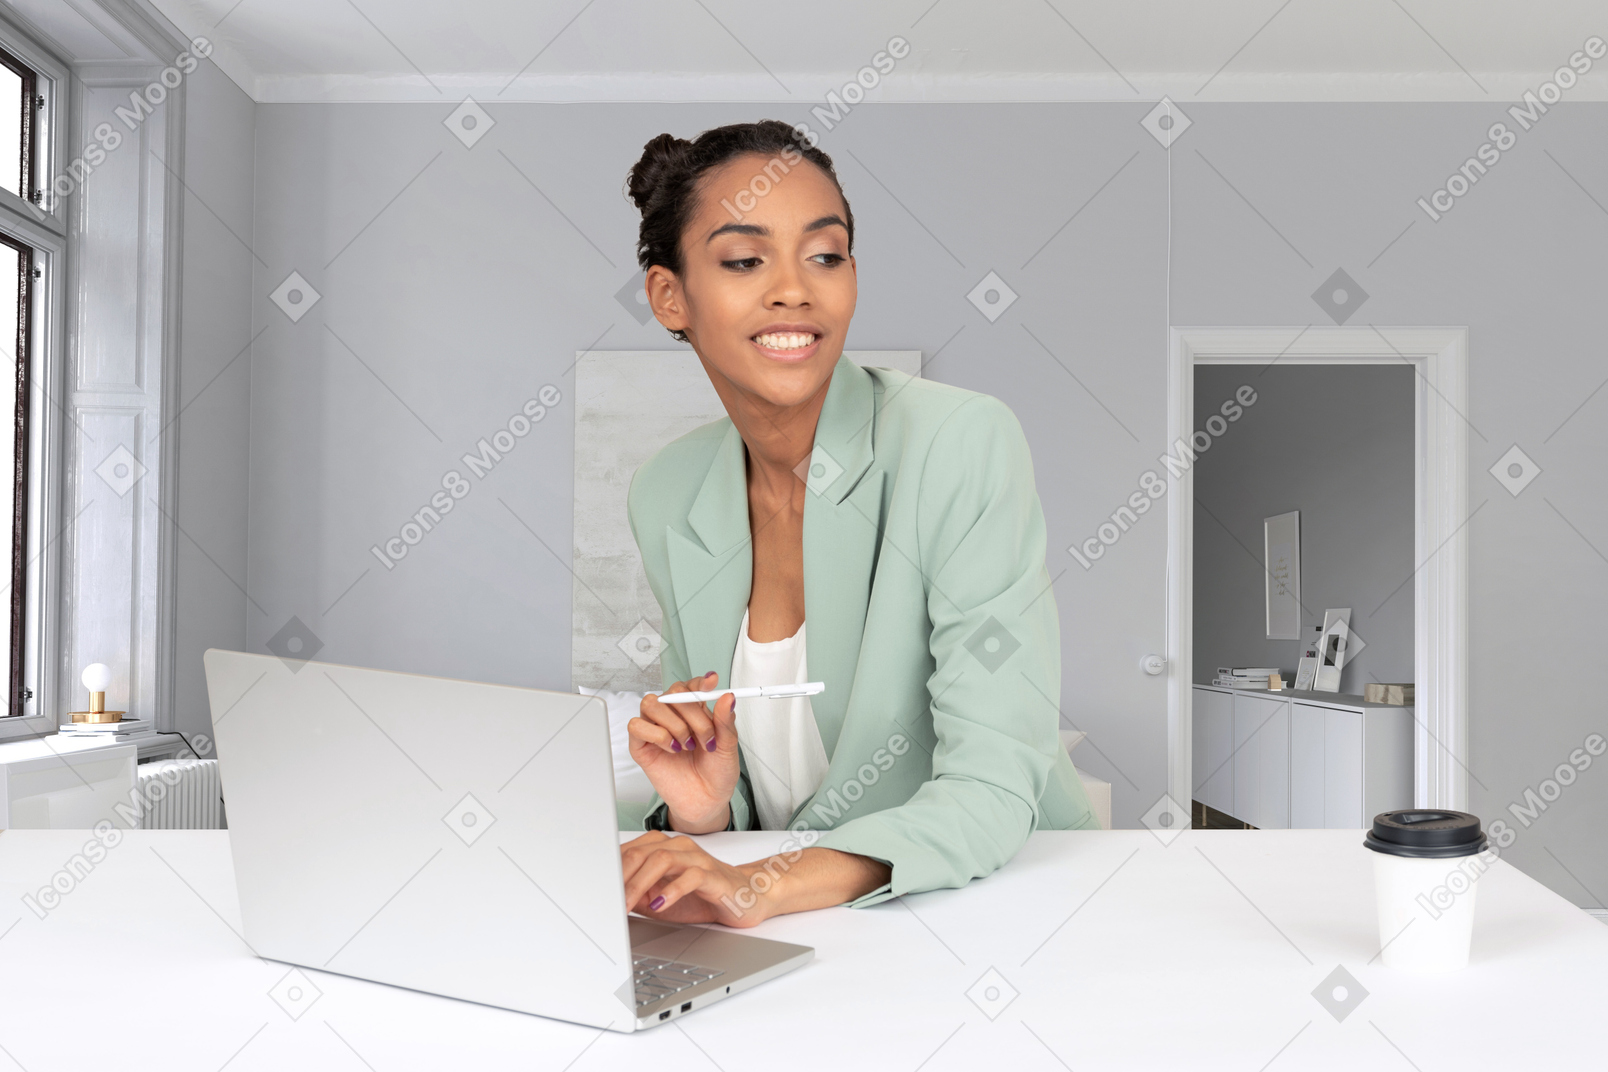 A woman sitting at a table with a laptop